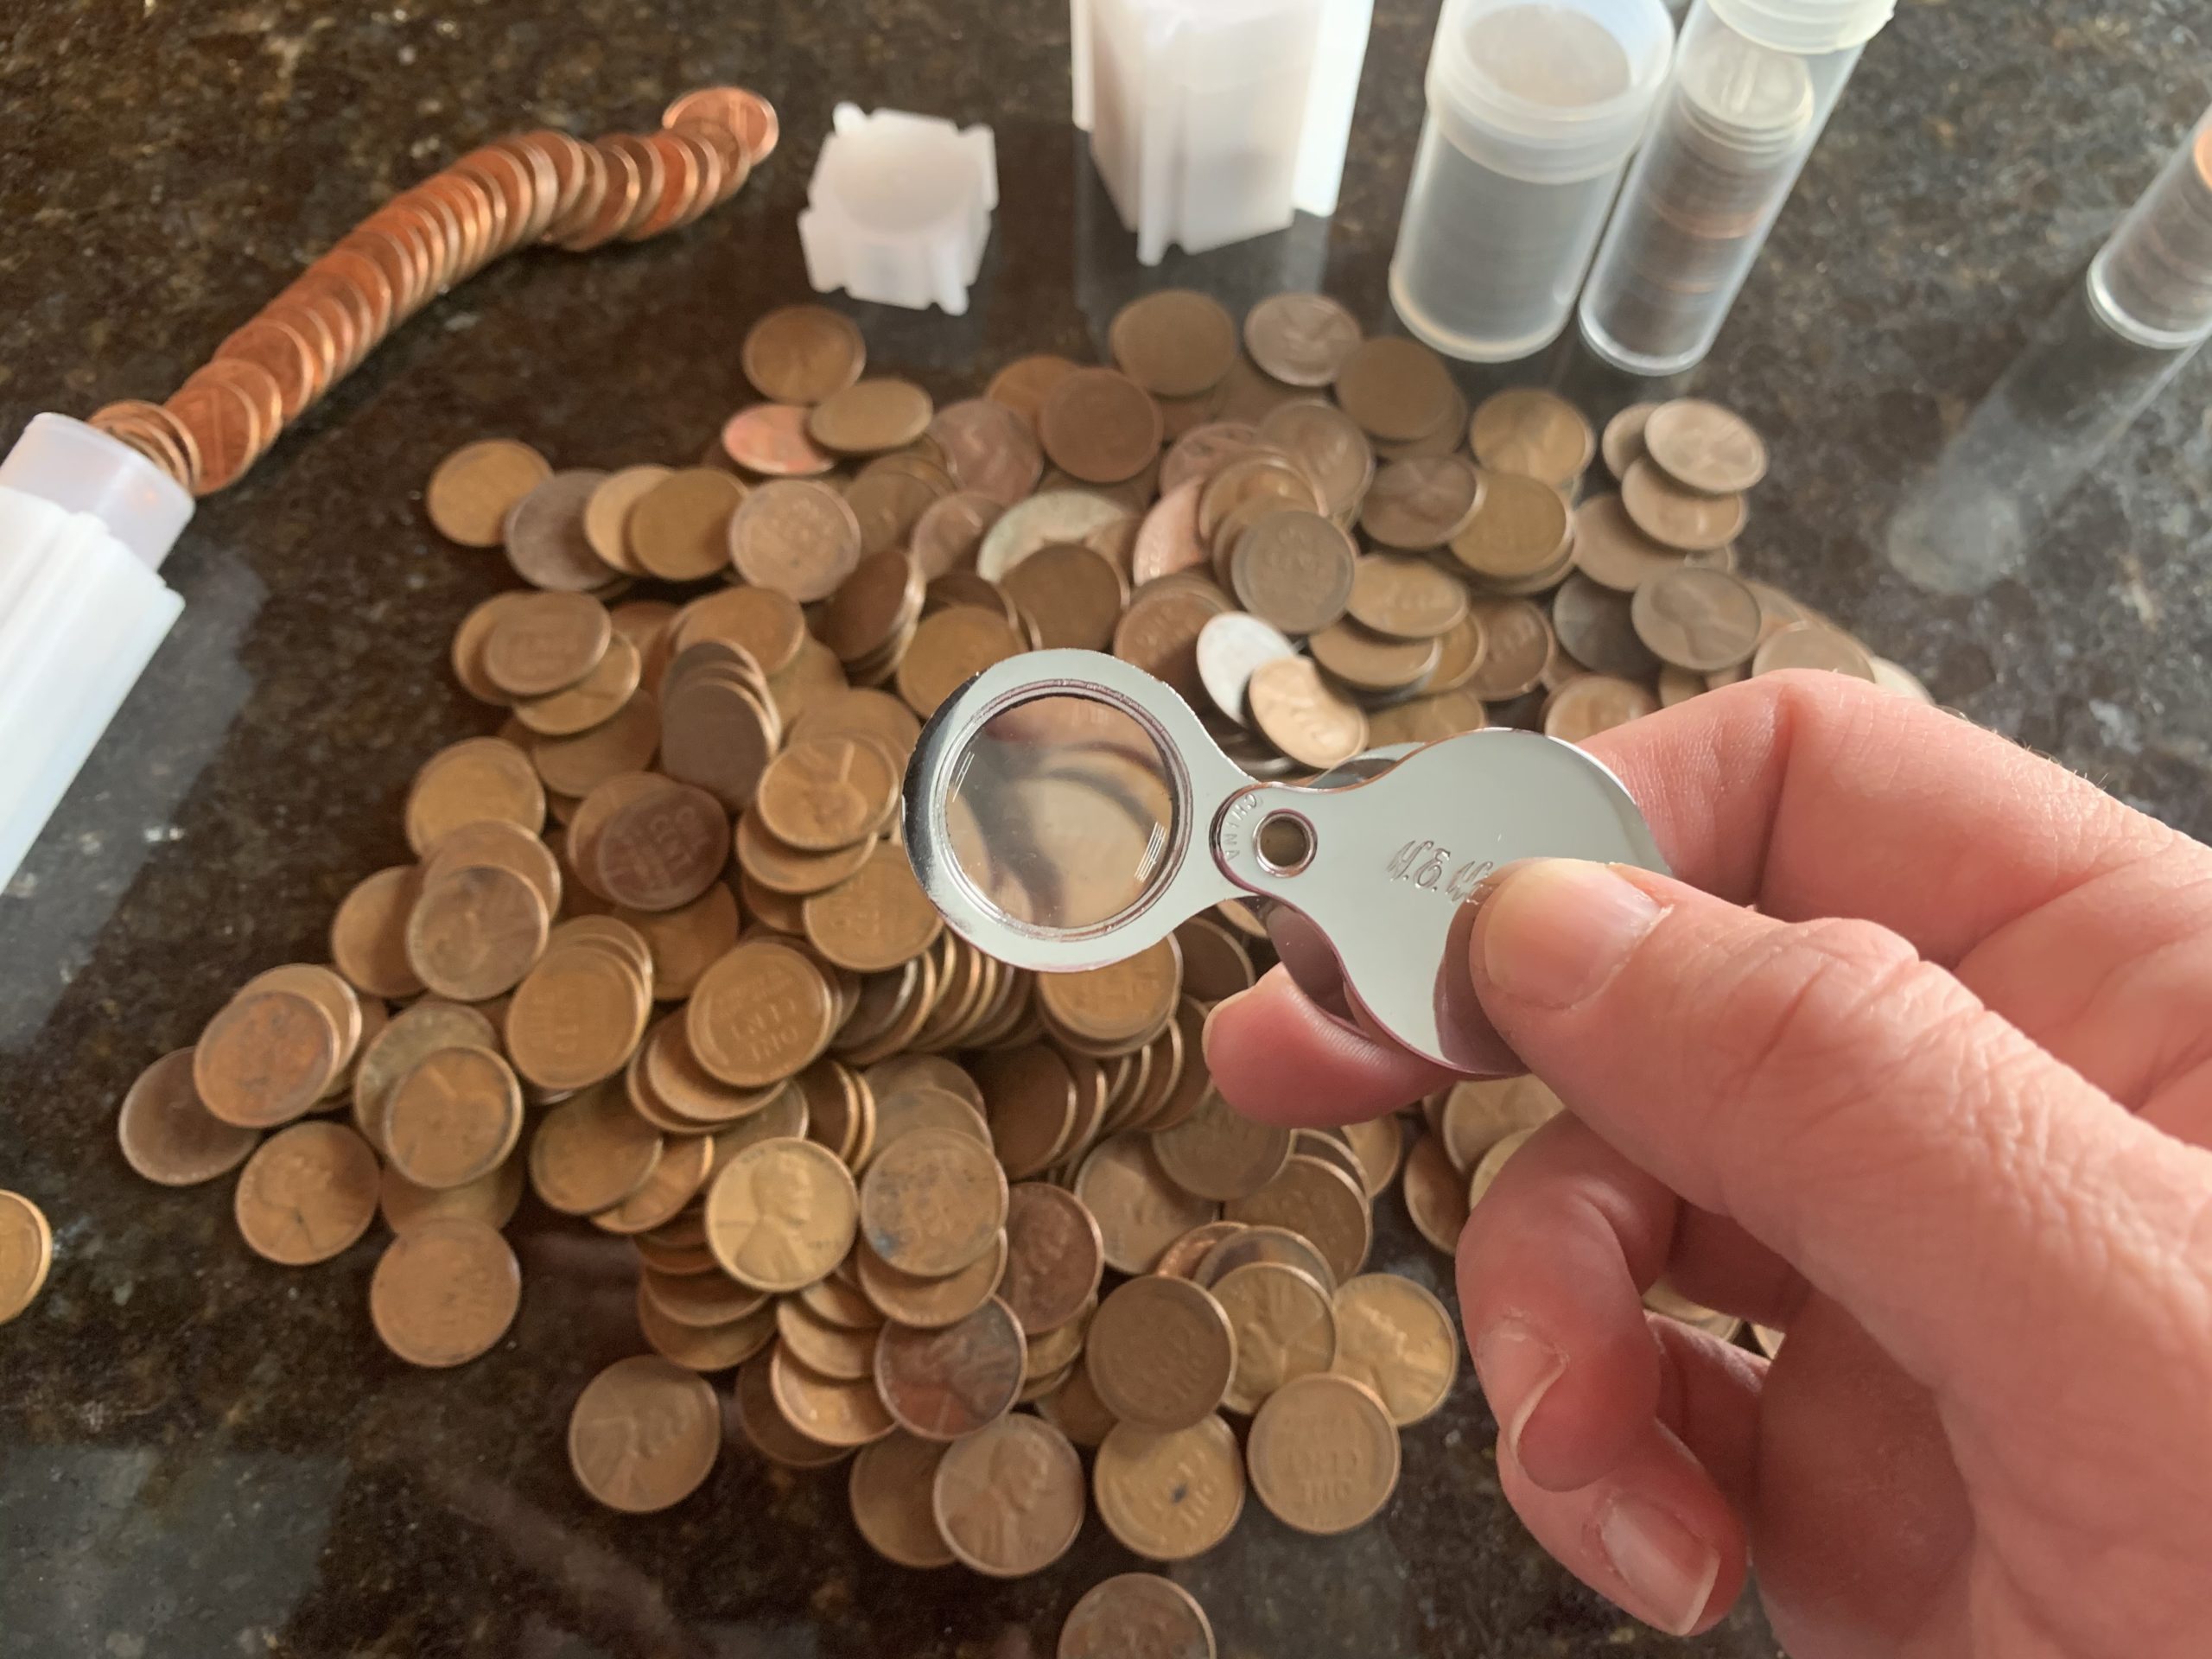 What's the best coin magnifier? Here are my two cents...